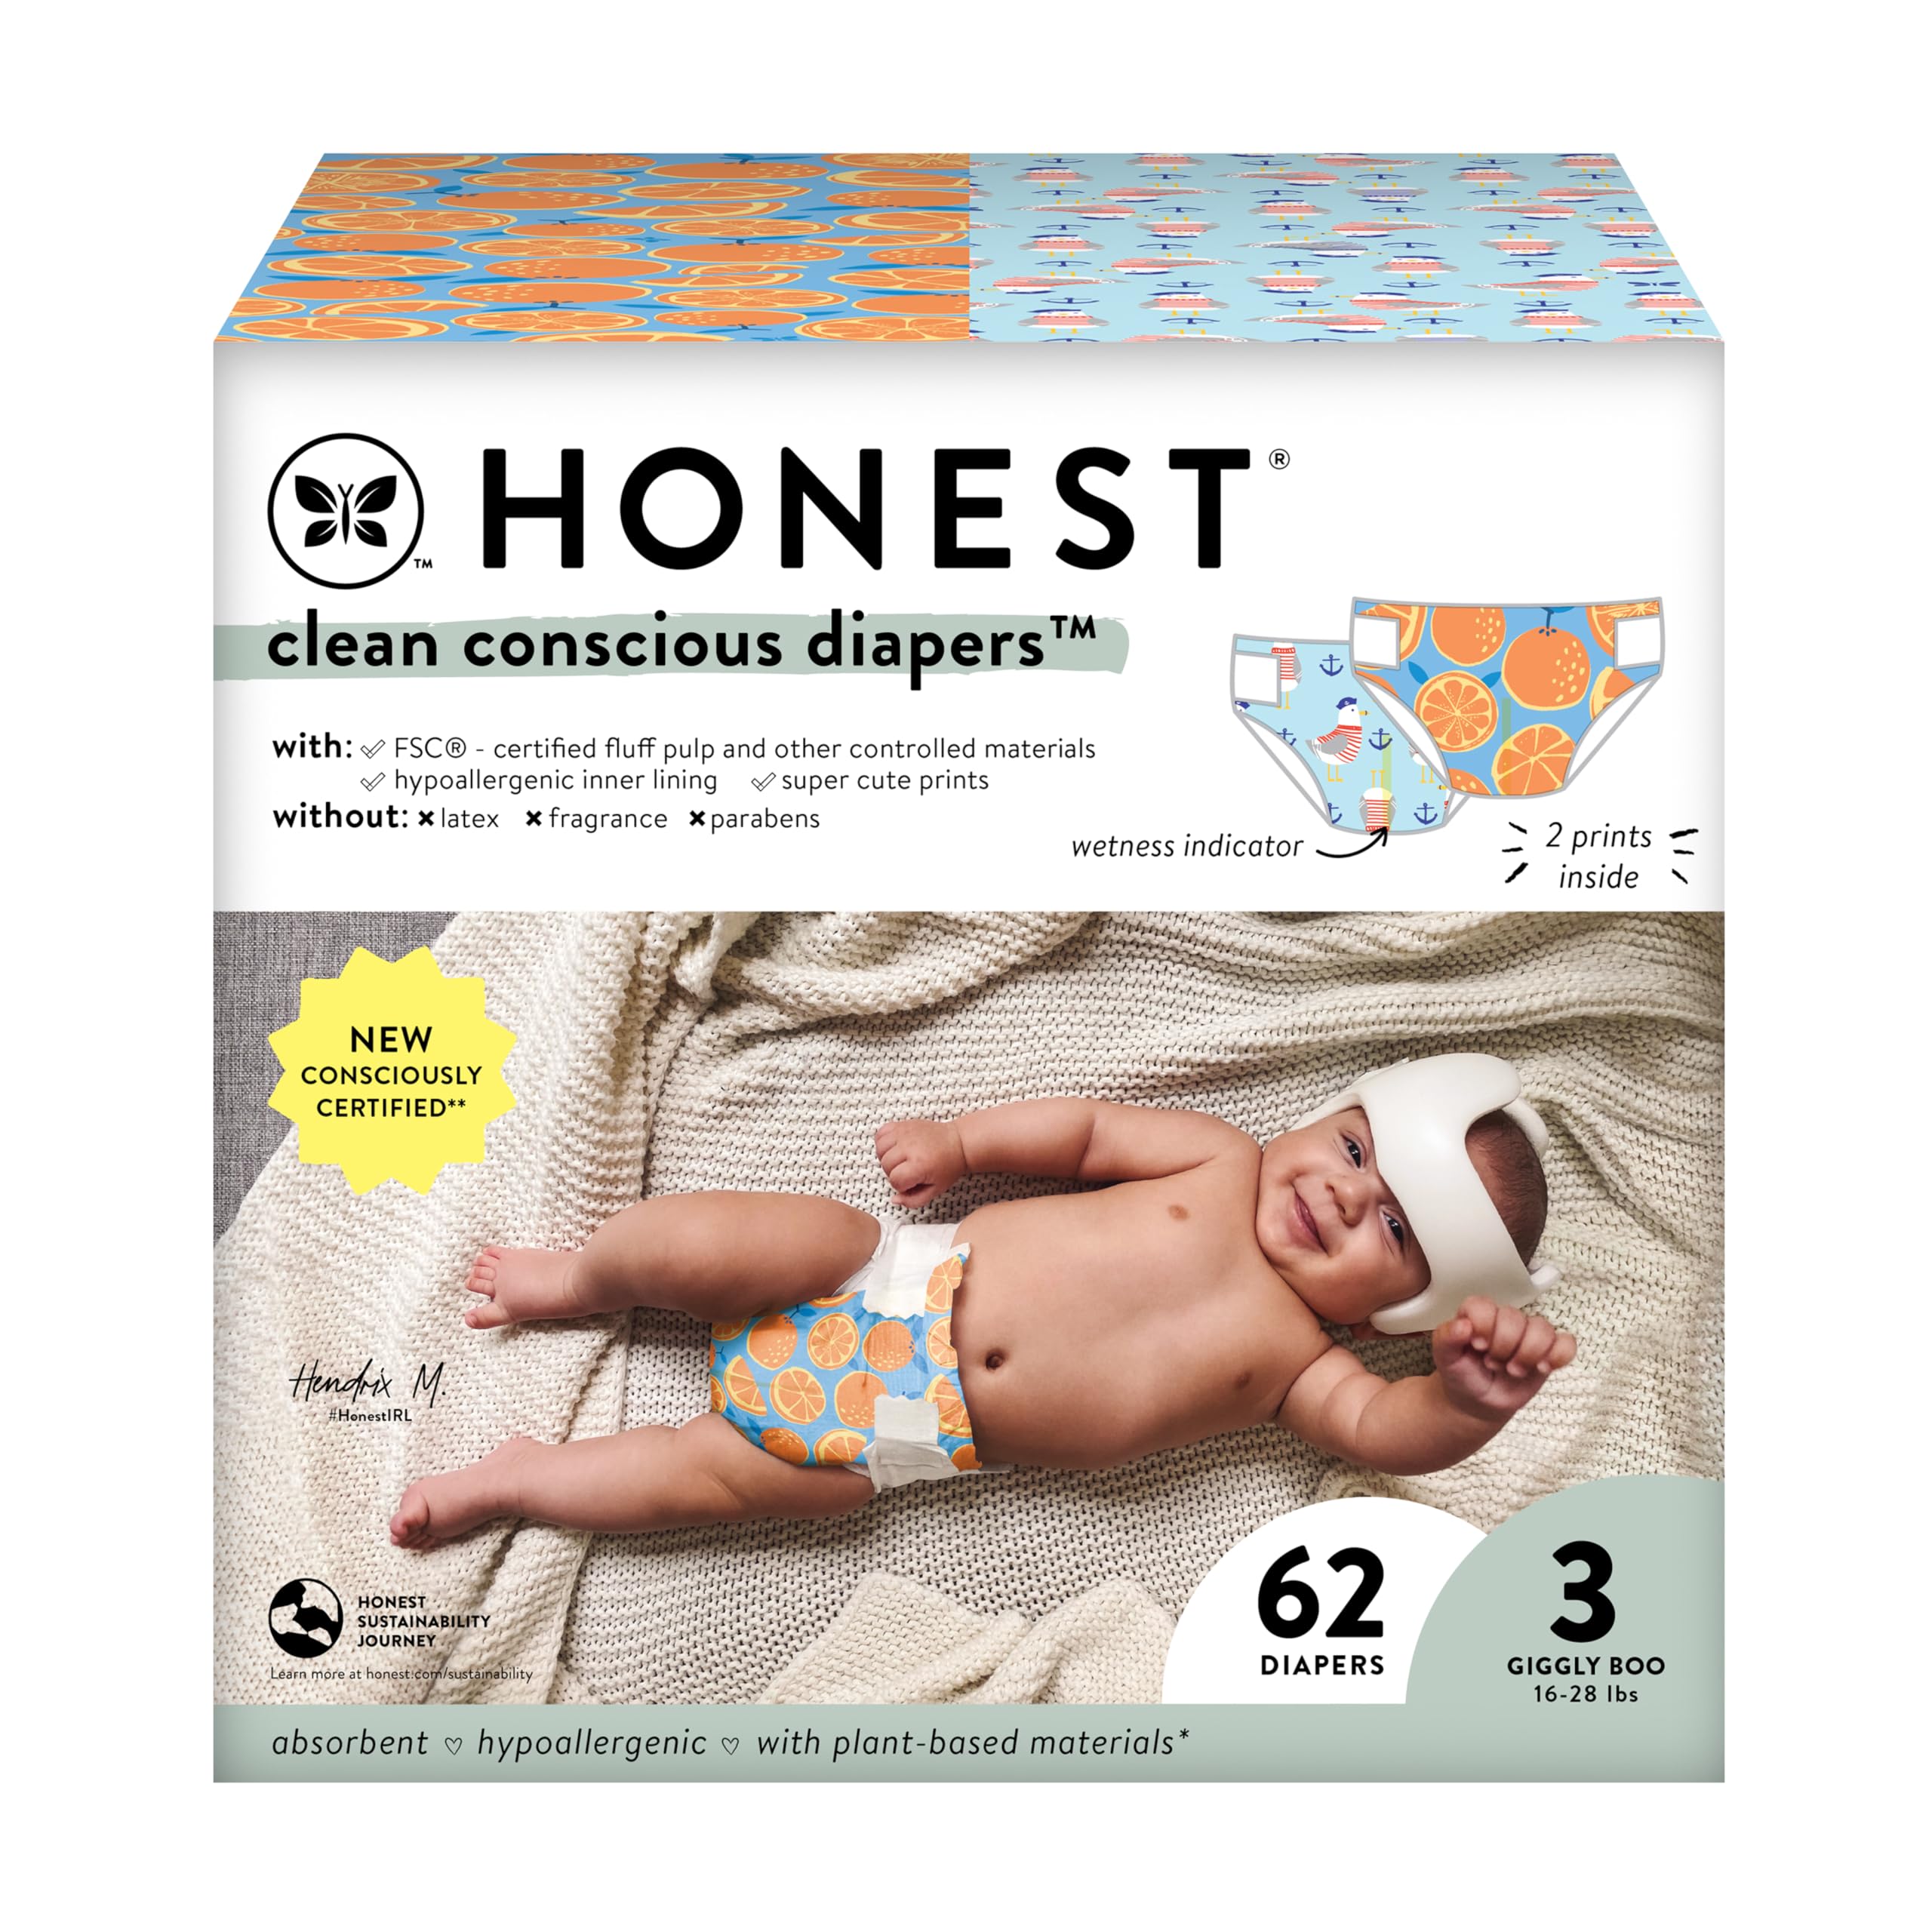 The Honest Company Clean Conscious Diapers | Plant-Based, Sustainable | Orange You Cute + Feeling Nauti | Club Box, Size 3 (16-28 lbs), 62 Count